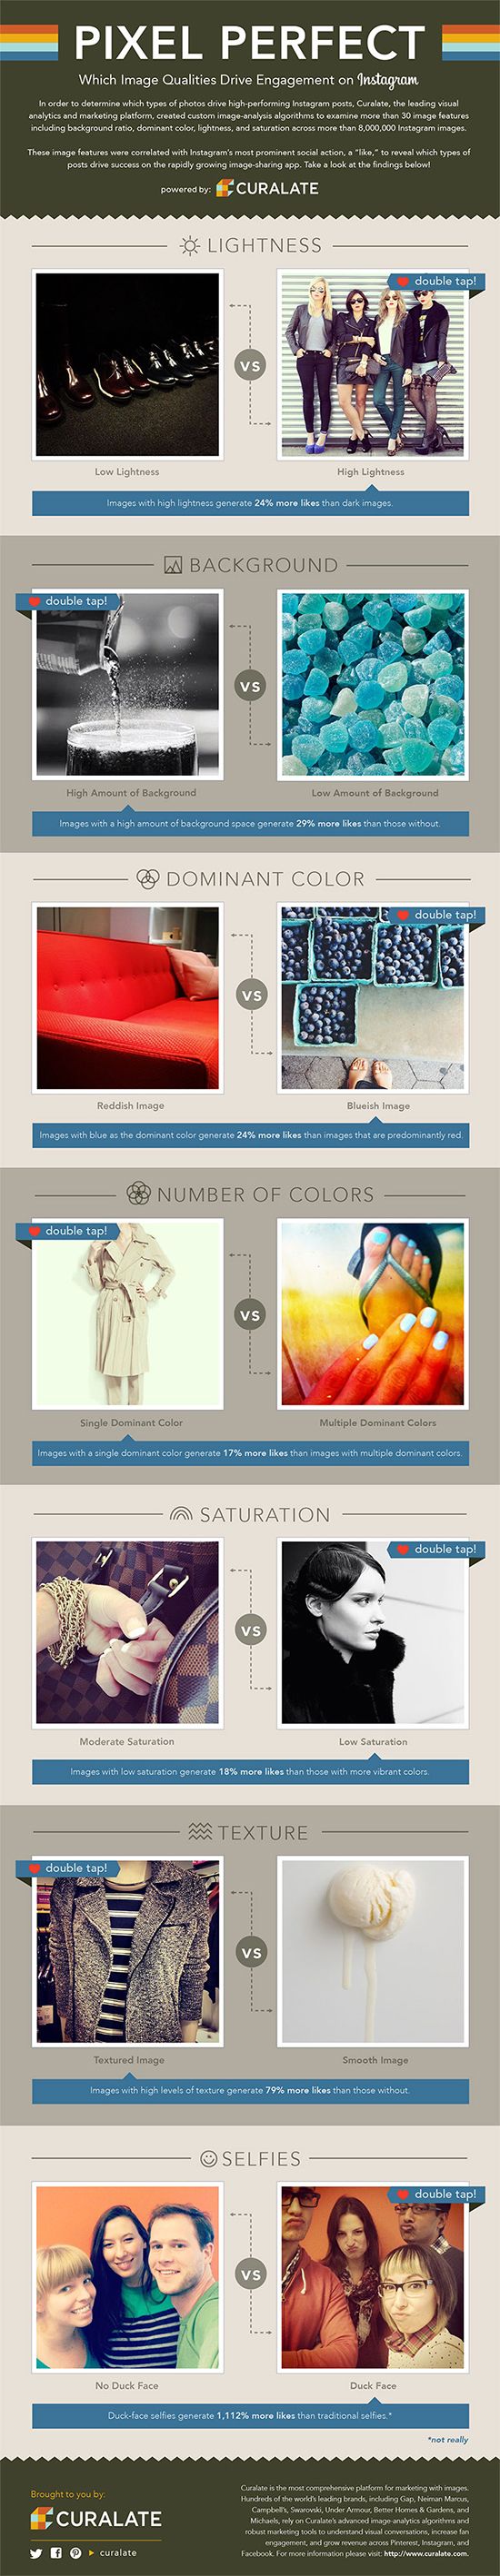 Infographic_Curalate